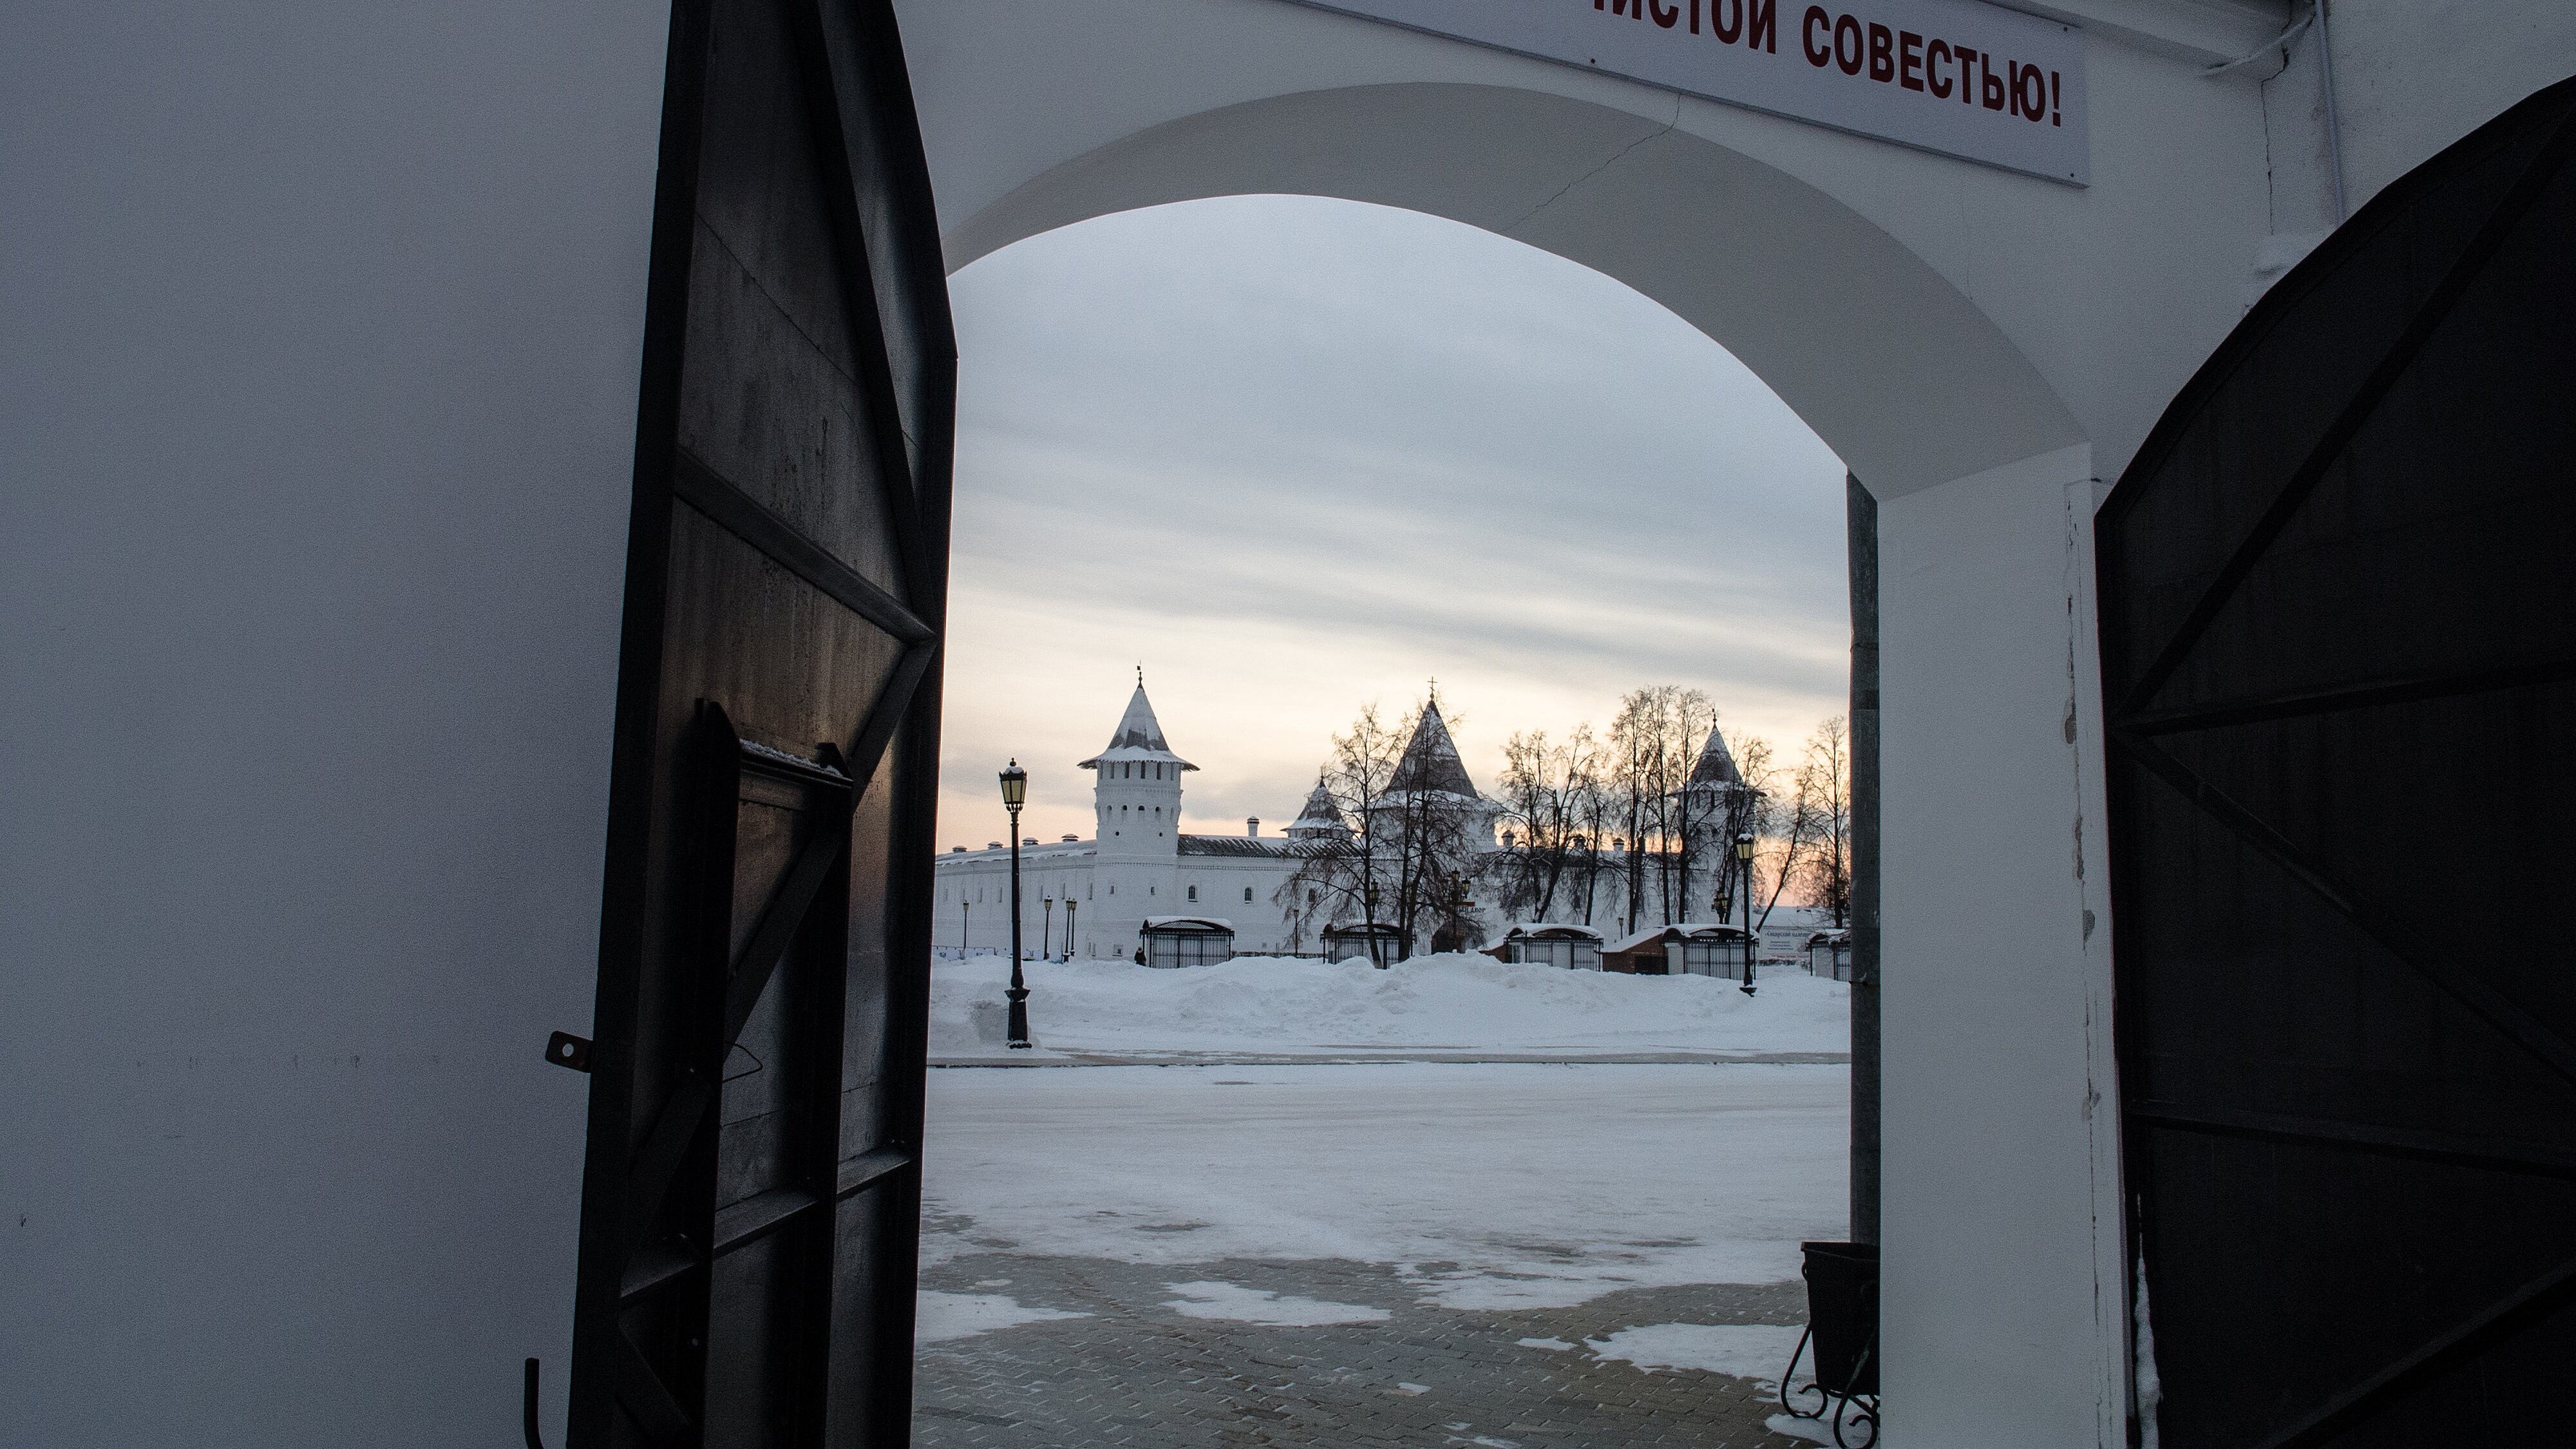 Gates leading from the prison castle in Tobolsk, Siberia. The writing says: "To the freedom with a clear conscience"